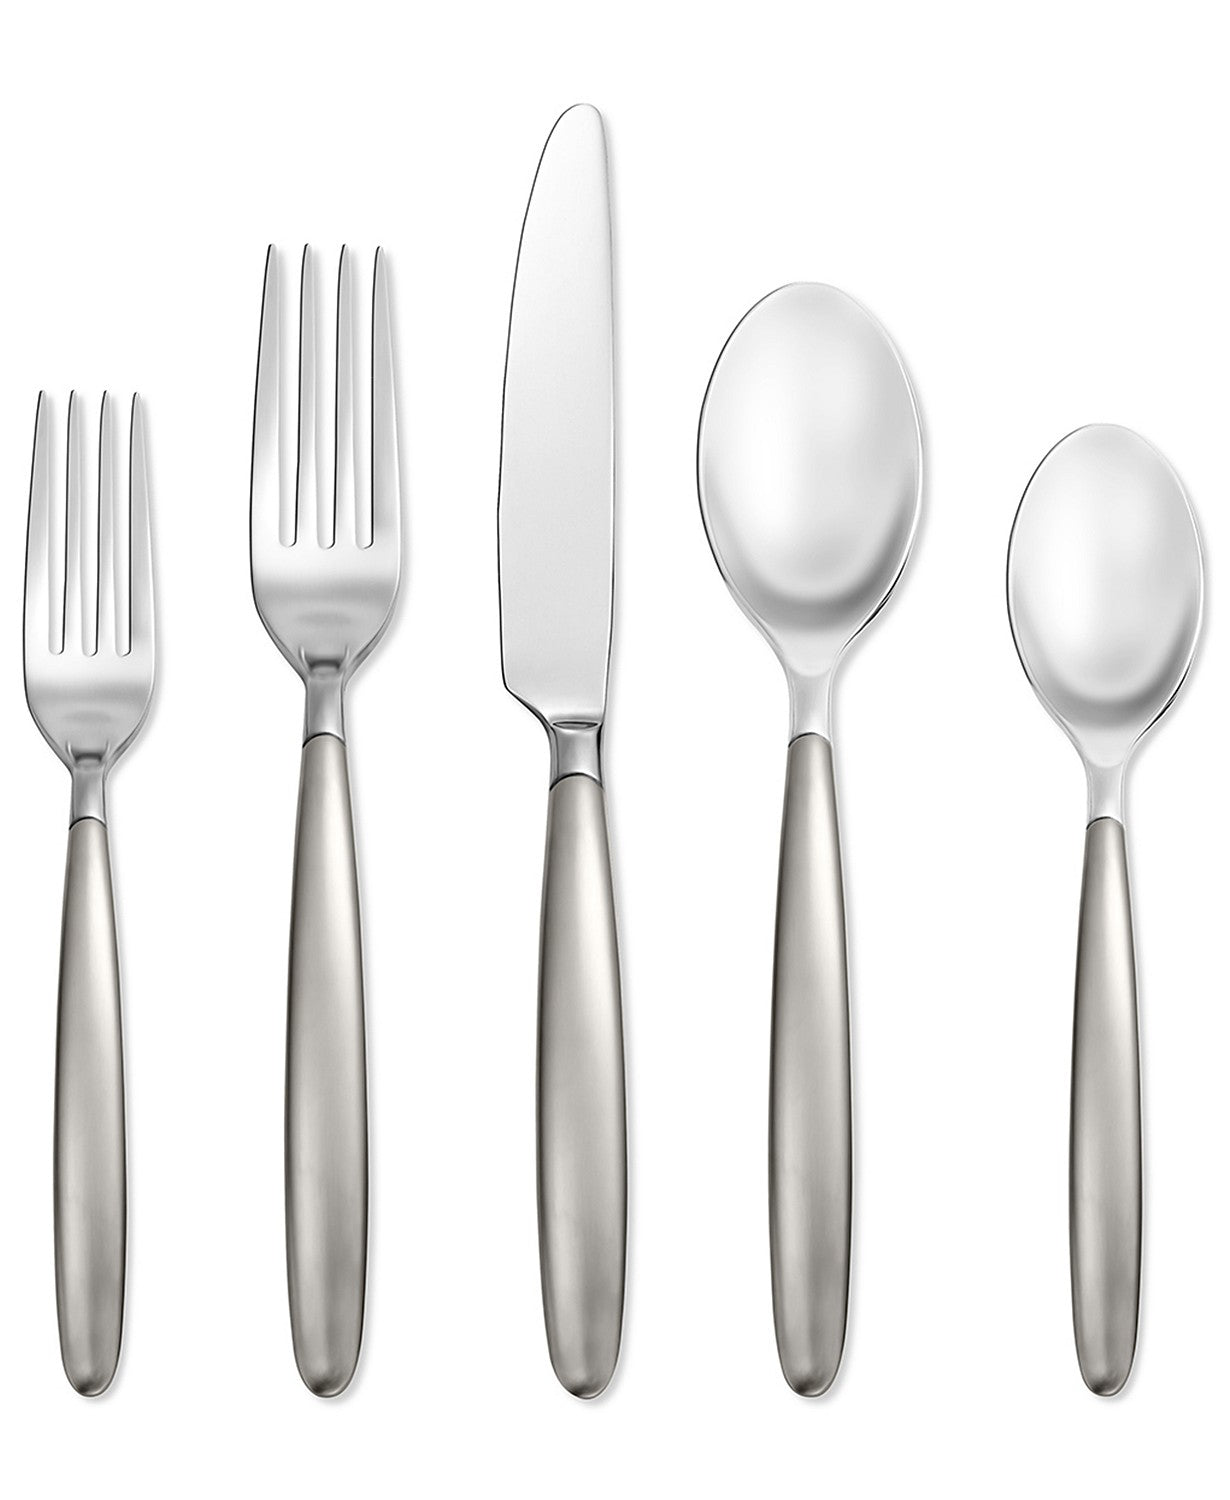 Hampton Forge Skandia Tidal Frosted 5 Piece Place Setting (18/0 Steel, Dishwasher Safe)